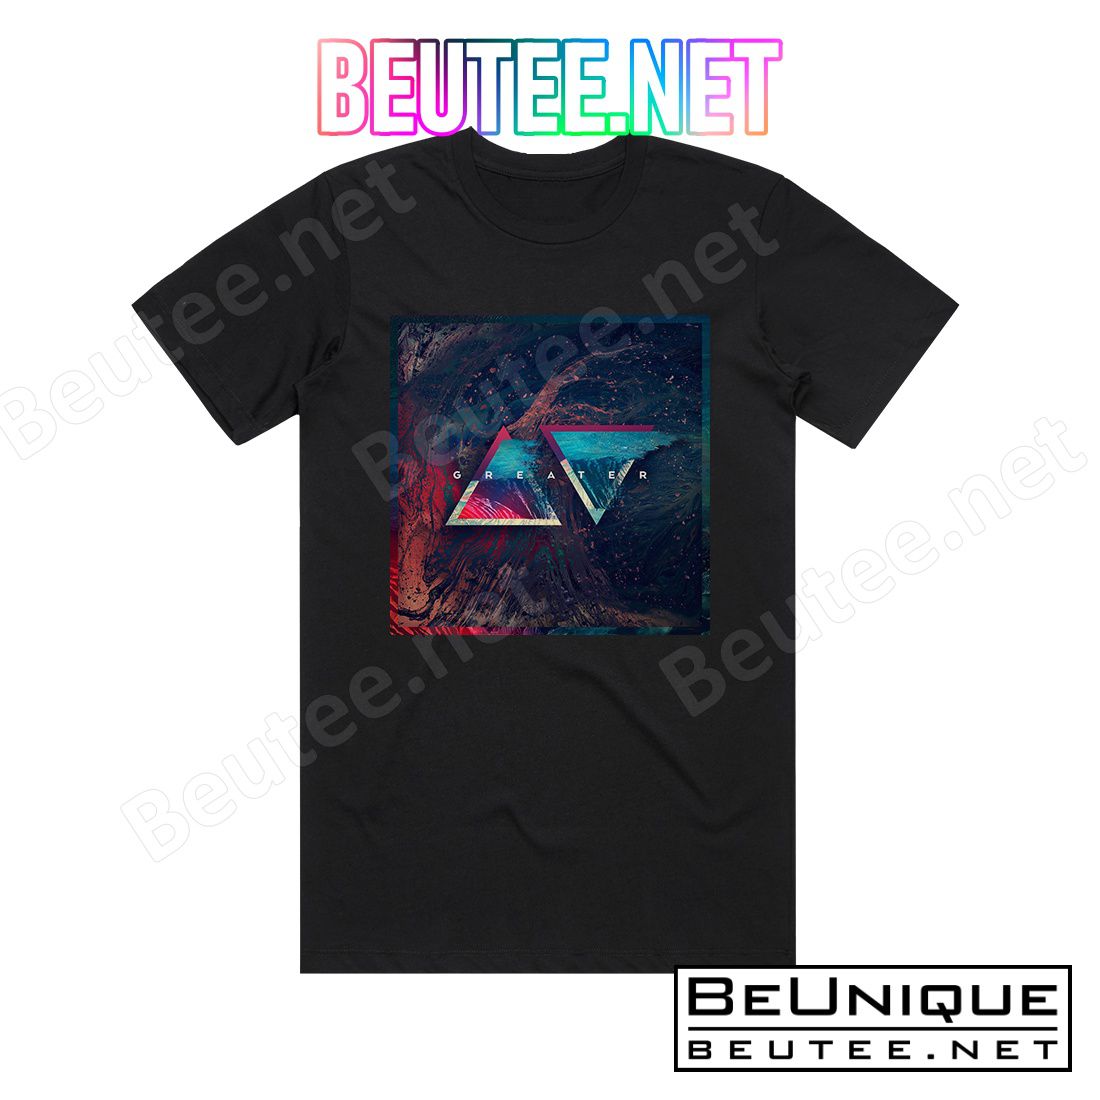 Central Live Greater Album Cover T-Shirt